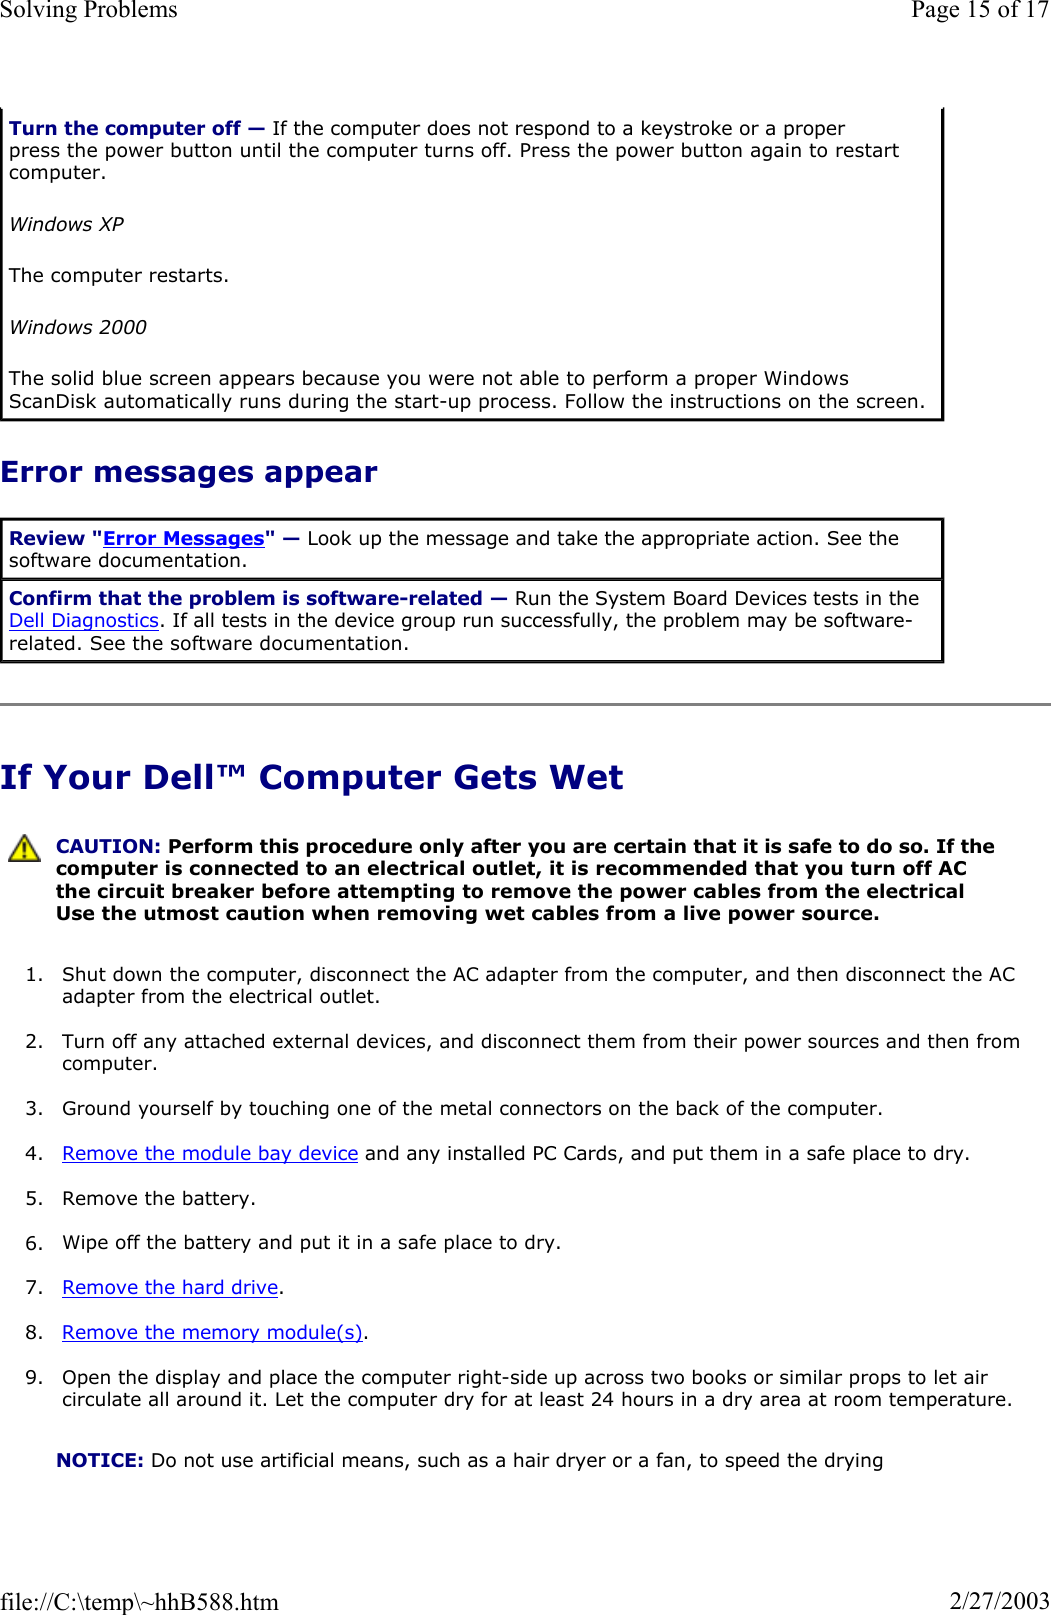 Error messages appear If Your Dell™ Computer Gets Wet 1. Shut down the computer, disconnect the AC adapter from the computer, and then disconnect the AC adapter from the electrical outlet. 2. Turn off any attached external devices, and disconnect them from their power sources and then from computer.3. Ground yourself by touching one of the metal connectors on the back of the computer. 4. Remove the module bay device and any installed PC Cards, and put them in a safe place to dry. 5. Remove the battery. 6. Wipe off the battery and put it in a safe place to dry. 7. Remove the hard drive.8. Remove the memory module(s).9. Open the display and place the computer right-side up across two books or similar props to let air circulate all around it. Let the computer dry for at least 24 hours in a dry area at room temperature. Turn the computer off — If the computer does not respond to a keystroke or a proper press the power button until the computer turns off. Press the power button again to restart computer.  Windows XPThe computer restarts. Windows 2000The solid blue screen appears because you were not able to perform a proper Windows ScanDisk automatically runs during the start-up process. Follow the instructions on the screen. Review &quot;Error Messages&quot; — Look up the message and take the appropriate action. See the software documentation. Confirm that the problem is software-related — Run the System Board Devices tests in the Dell Diagnostics. If all tests in the device group run successfully, the problem may be software-related. See the software documentation. CAUTION: Perform this procedure only after you are certain that it is safe to do so. If the computer is connected to an electrical outlet, it is recommended that you turn off AC the circuit breaker before attempting to remove the power cables from the electrical Use the utmost caution when removing wet cables from a live power source.NOTICE: Do not use artificial means, such as a hair dryer or a fan, to speed the drying Page 15 of 17Solving Problems2/27/2003file://C:\temp\~hhB588.htm